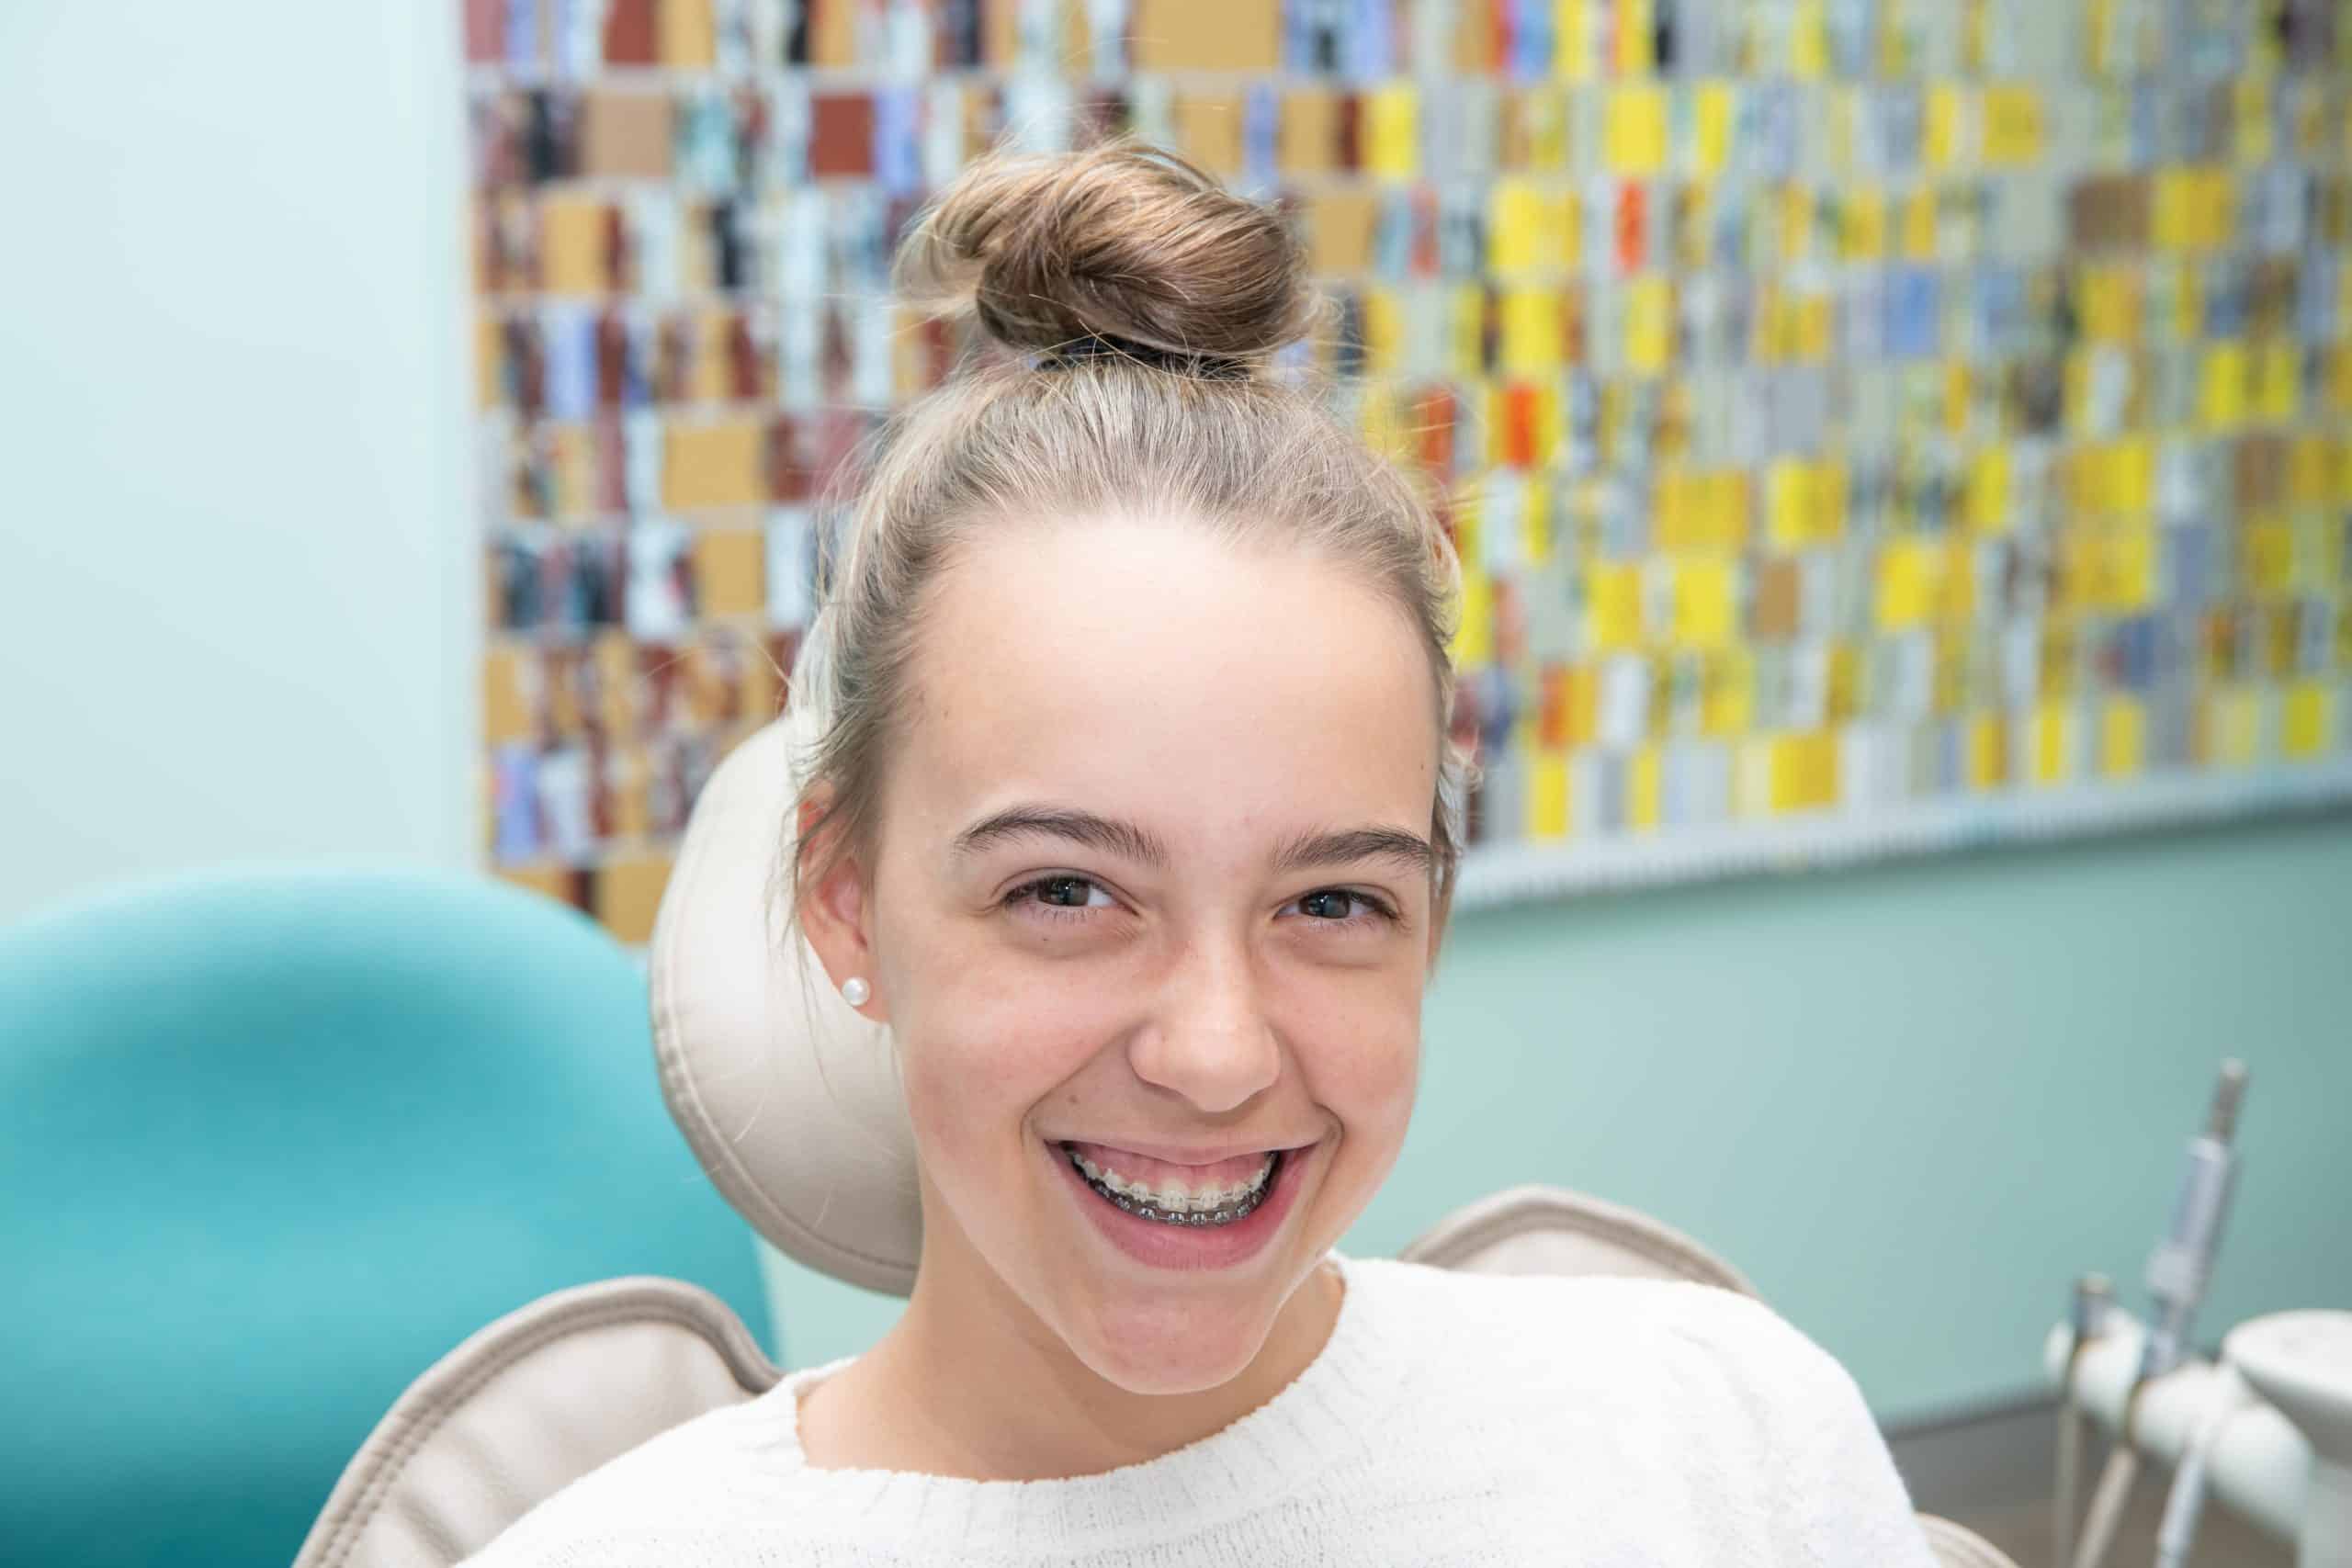 A girl smiling with braces